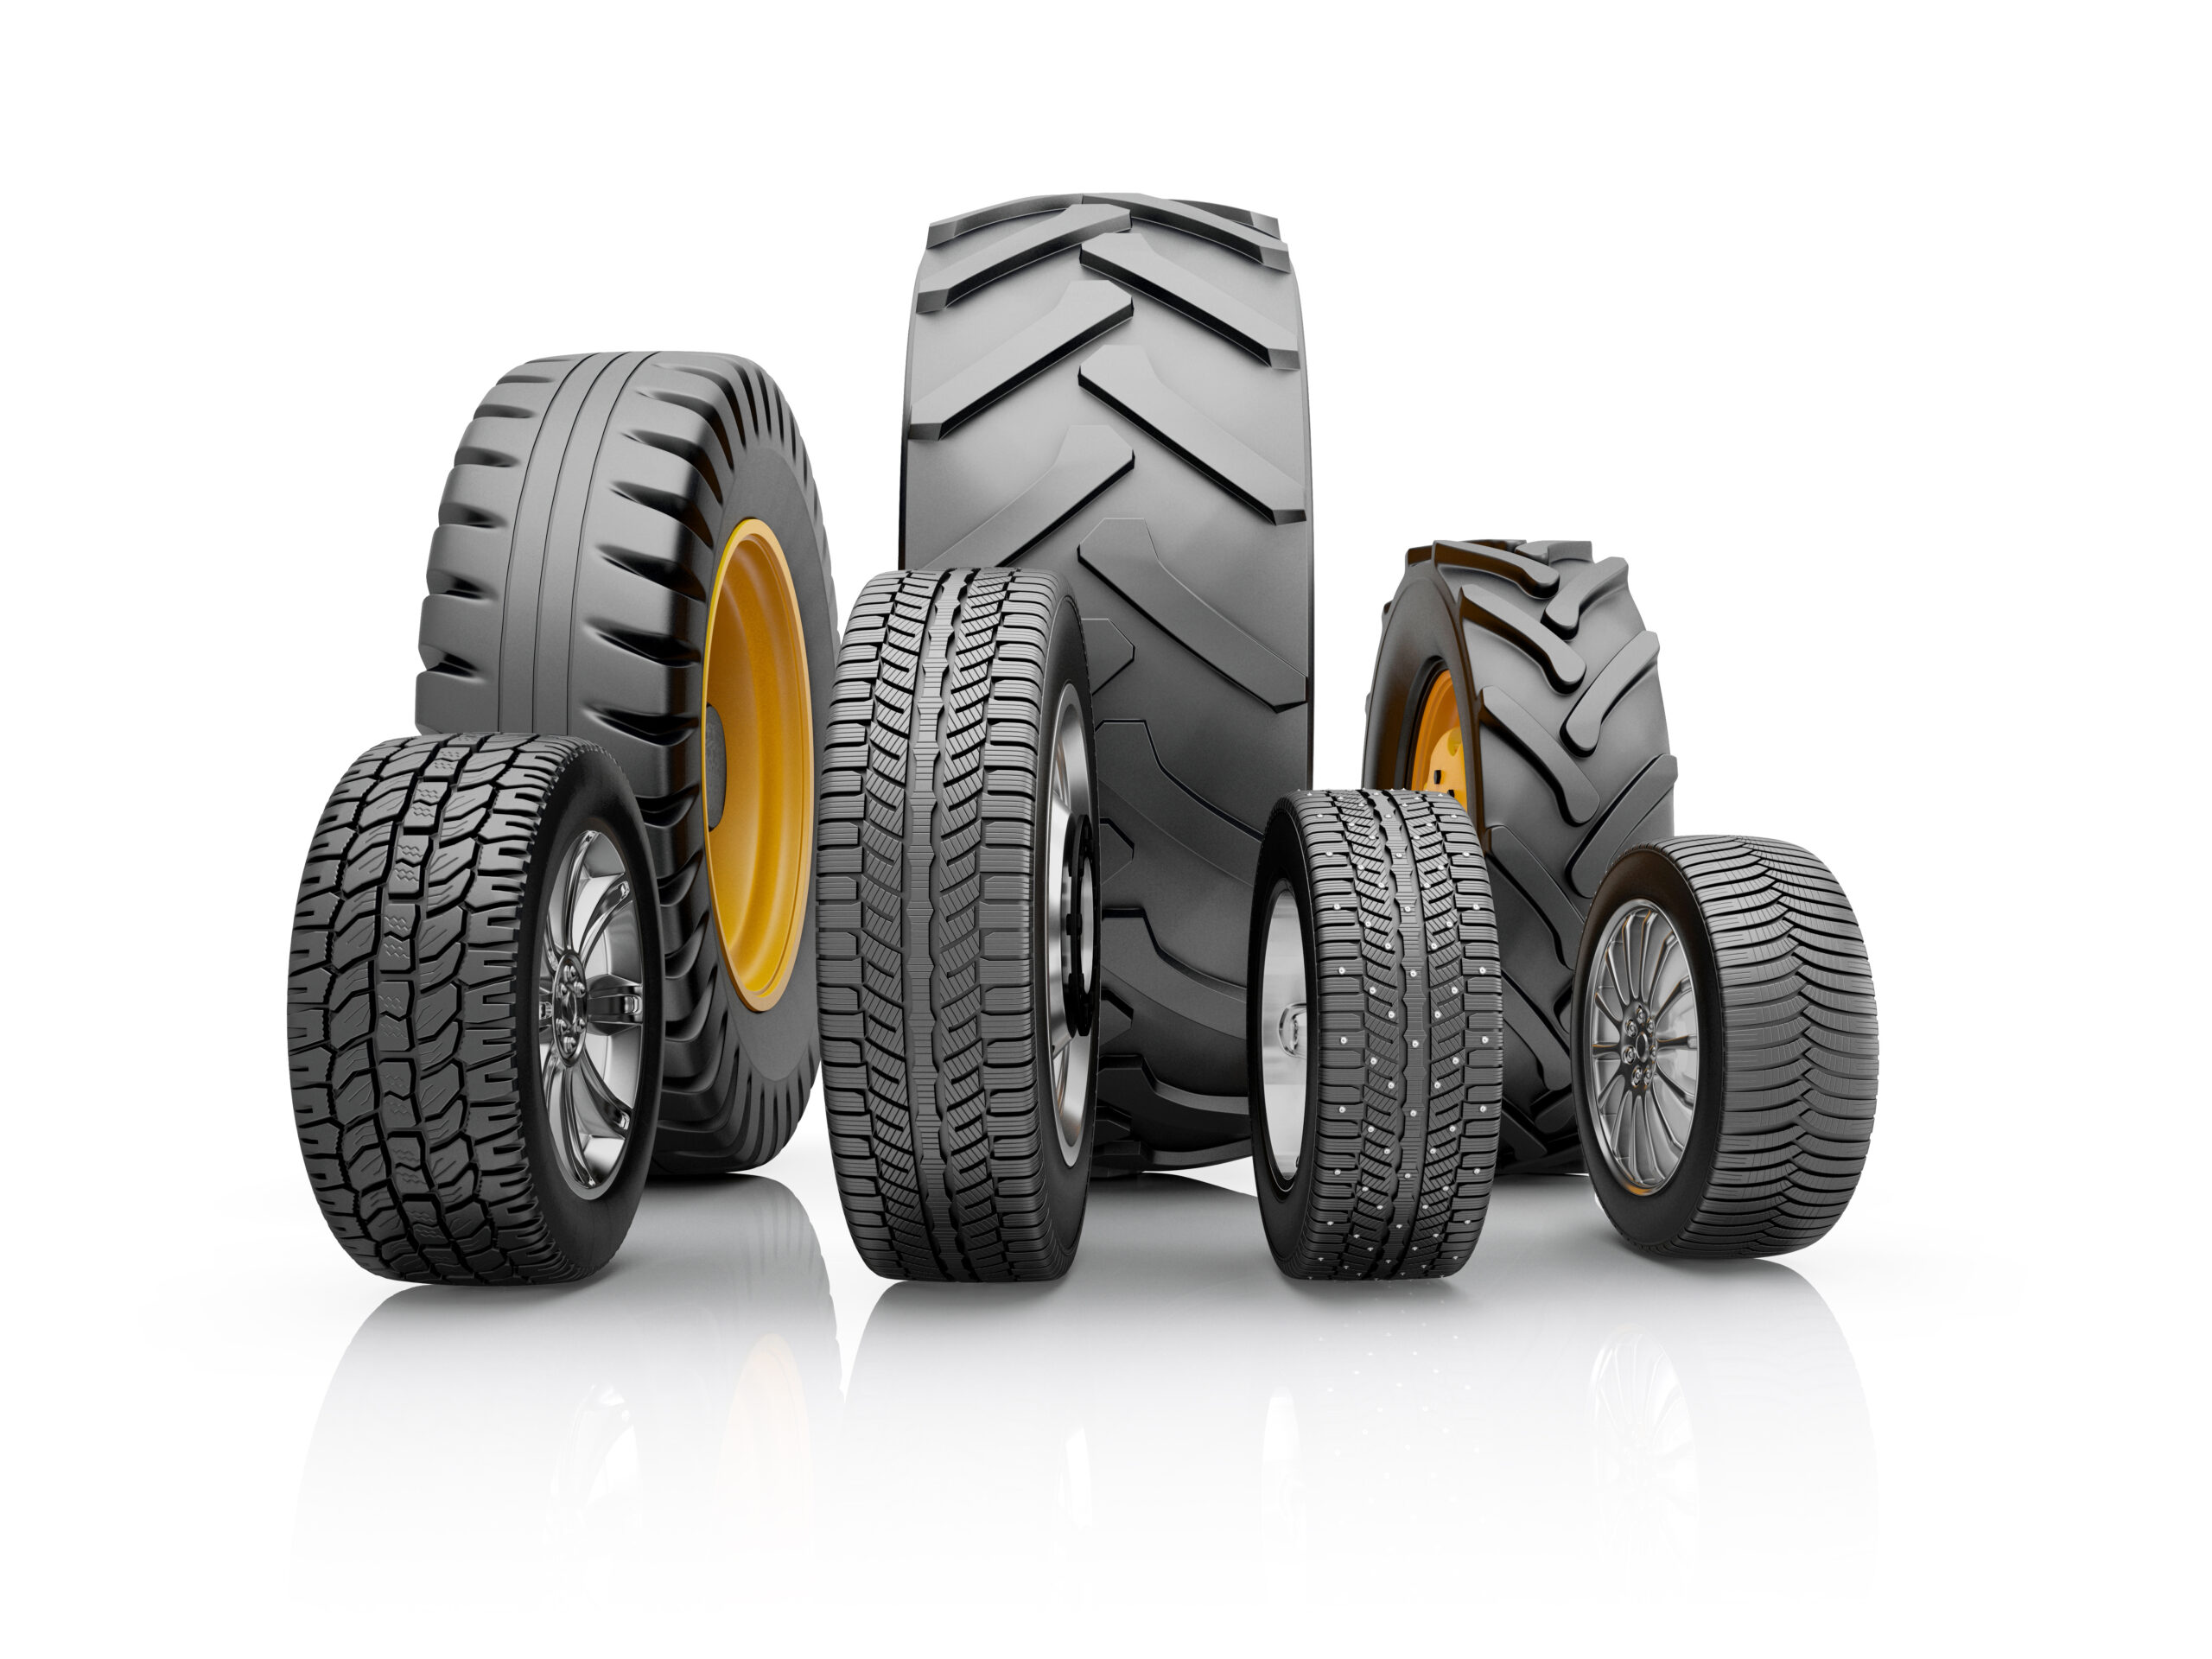 Set-of-different-tires-for-a-different-car-3d-illustration-on-a-white-background